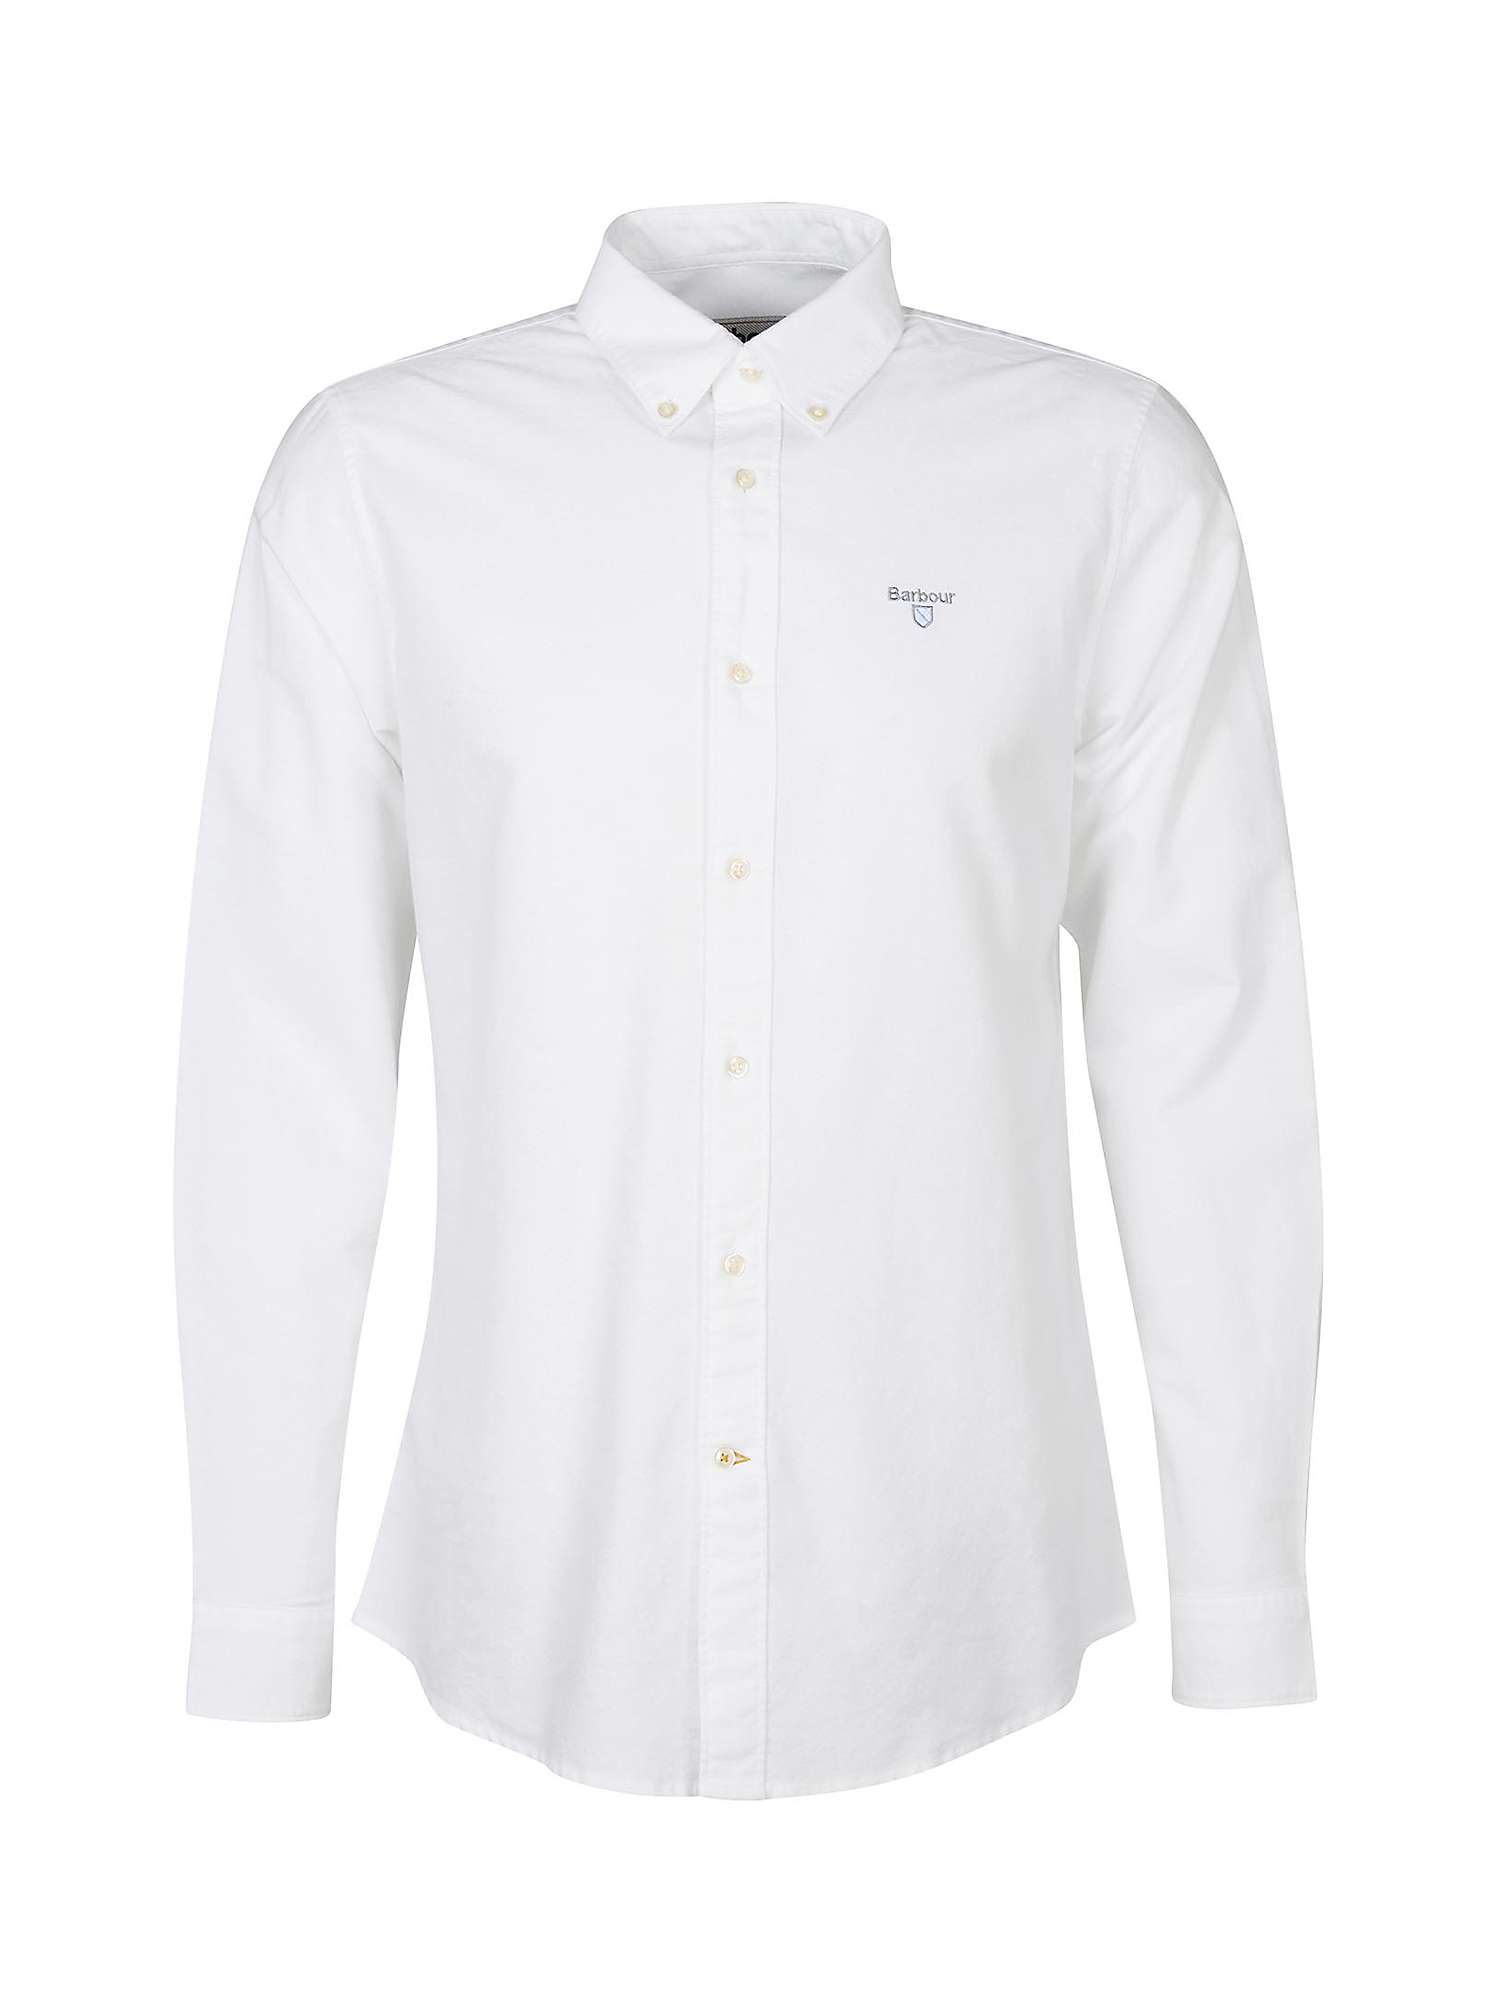 Buy Barbour Tailored Fit Oxford Shirt Online at johnlewis.com